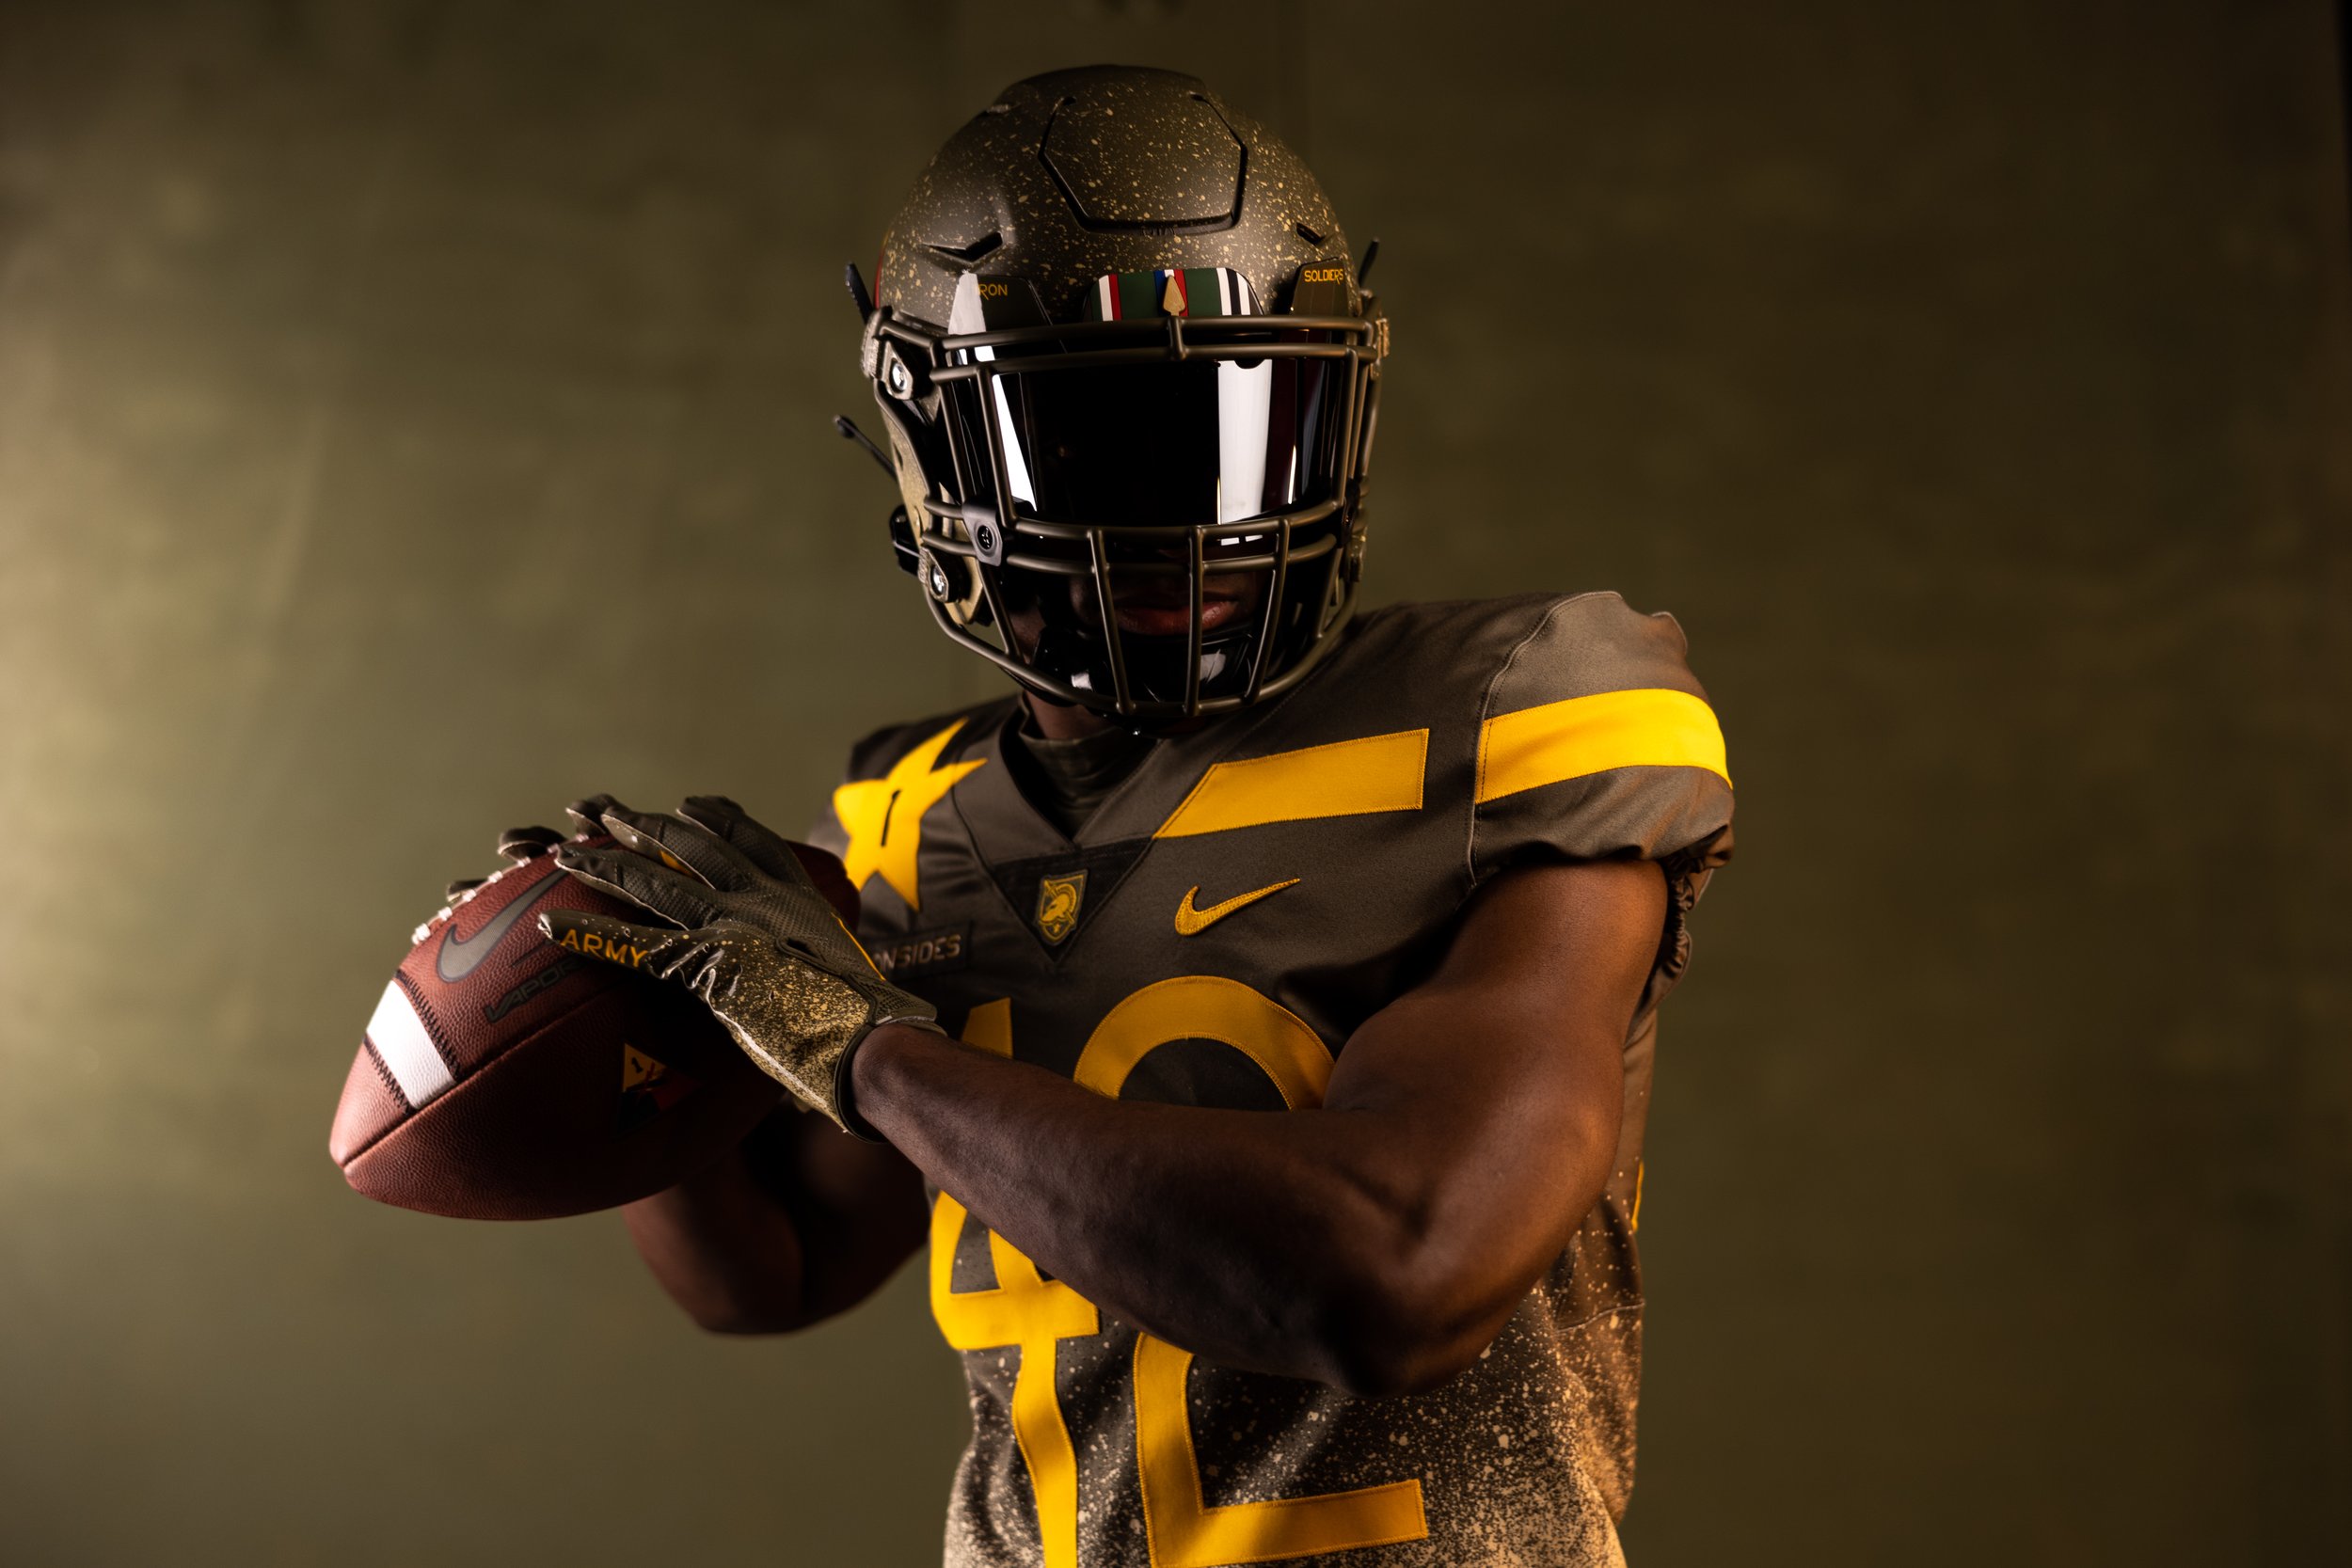 2012 Oregon Lime Green and Black Unis with Yellow Helmets